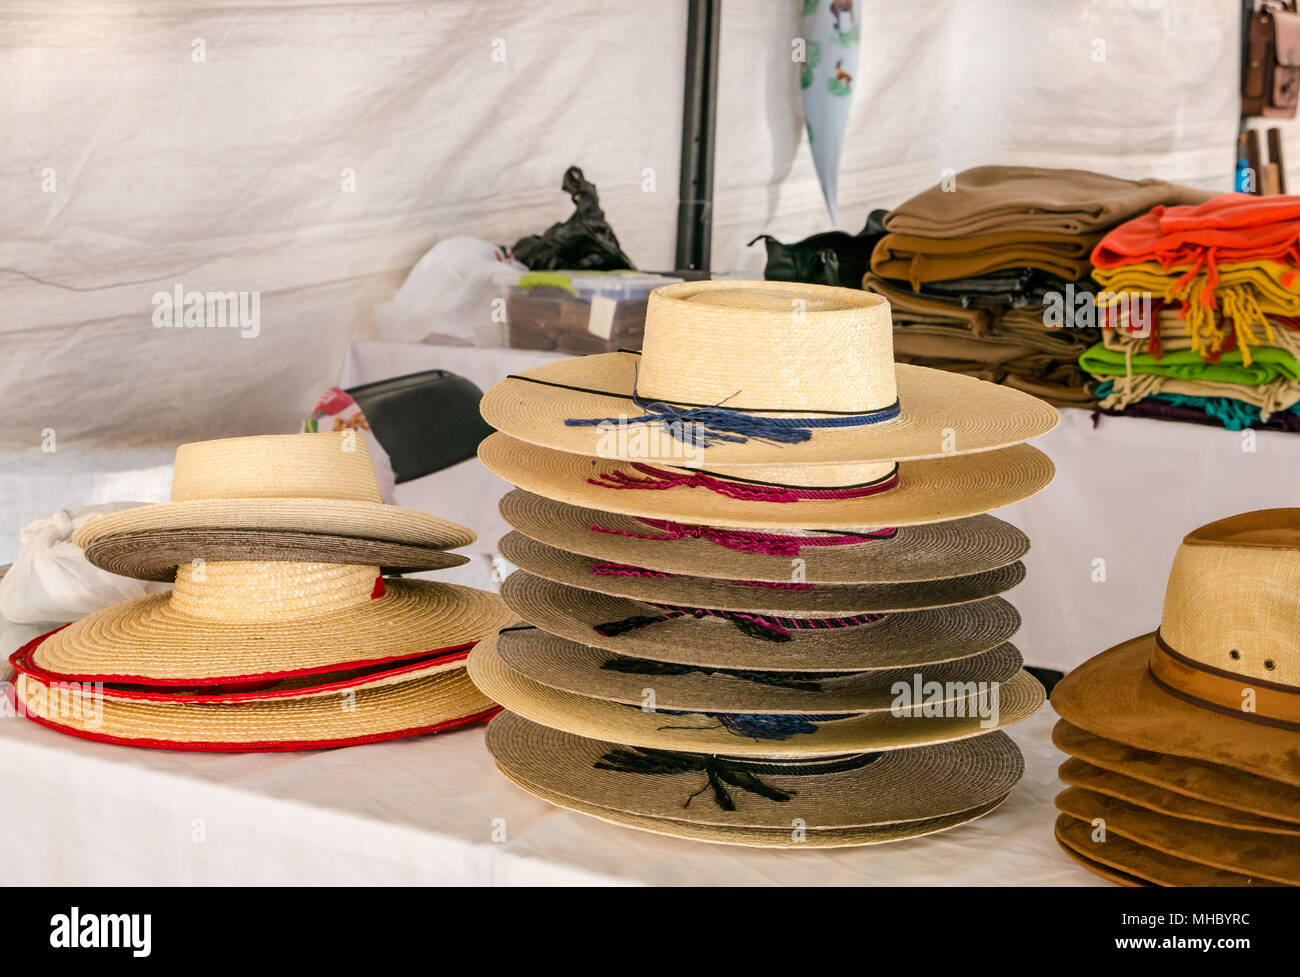 Display of traditional Chilean straw hats at craft market, Santa Cruz wine region, Colchagua Valley, Chile, South America Stock Photo